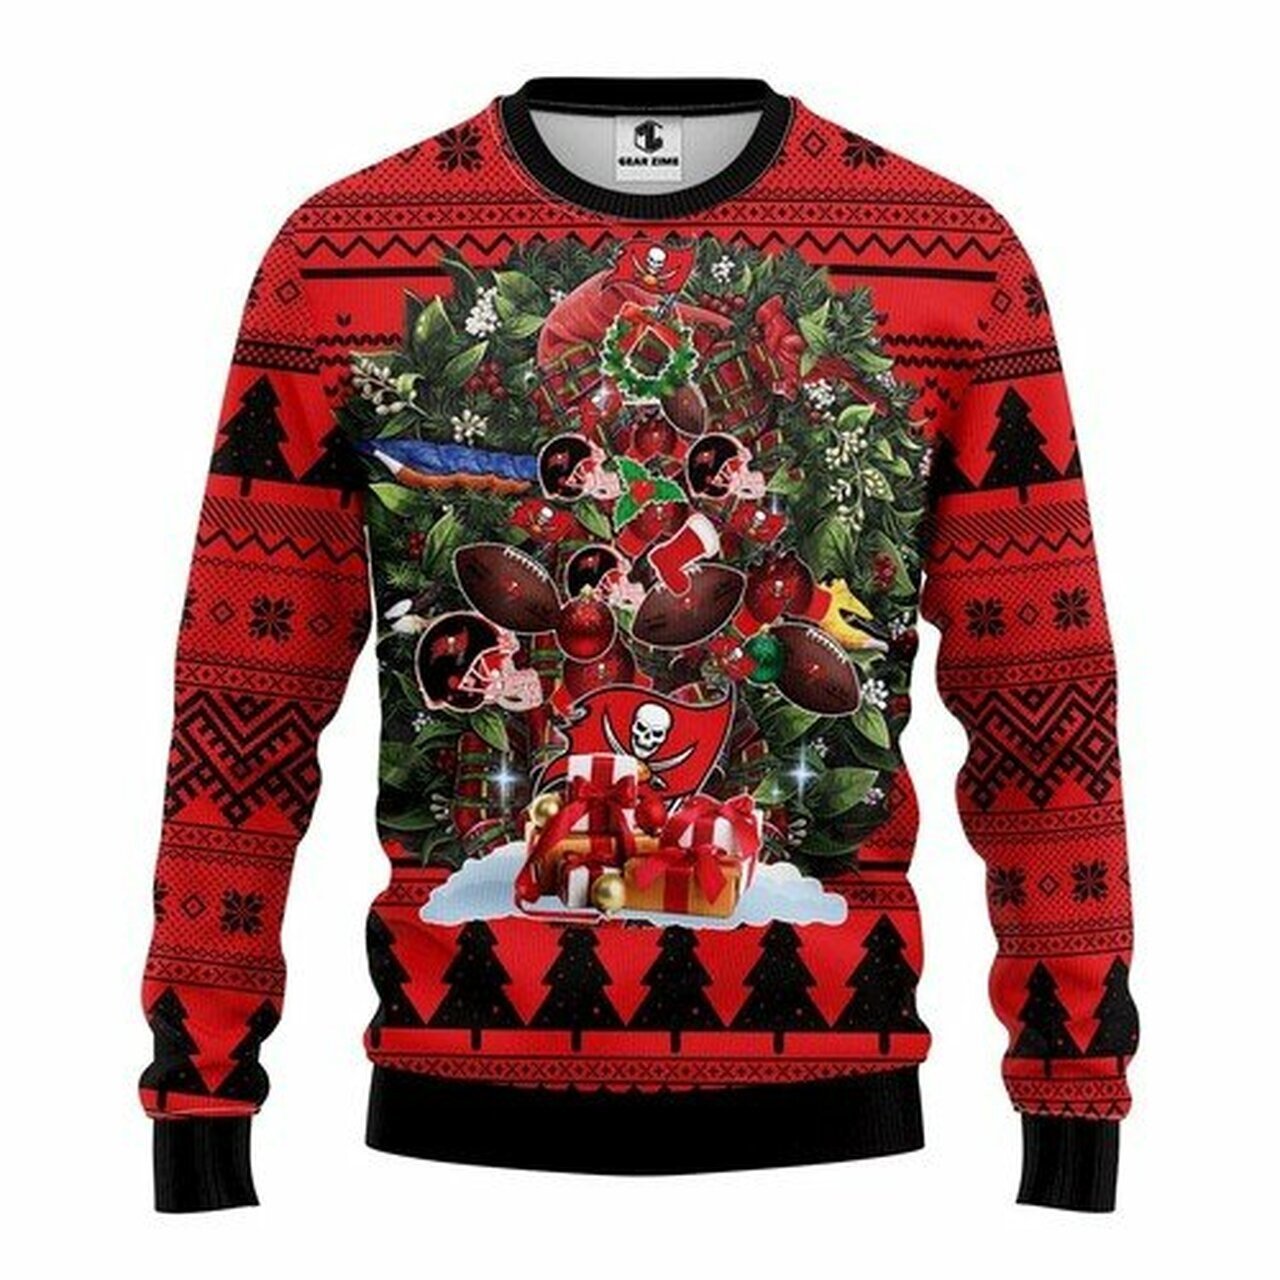 NFL Tampa Bay Buccaneers christmas tree ugly sweater